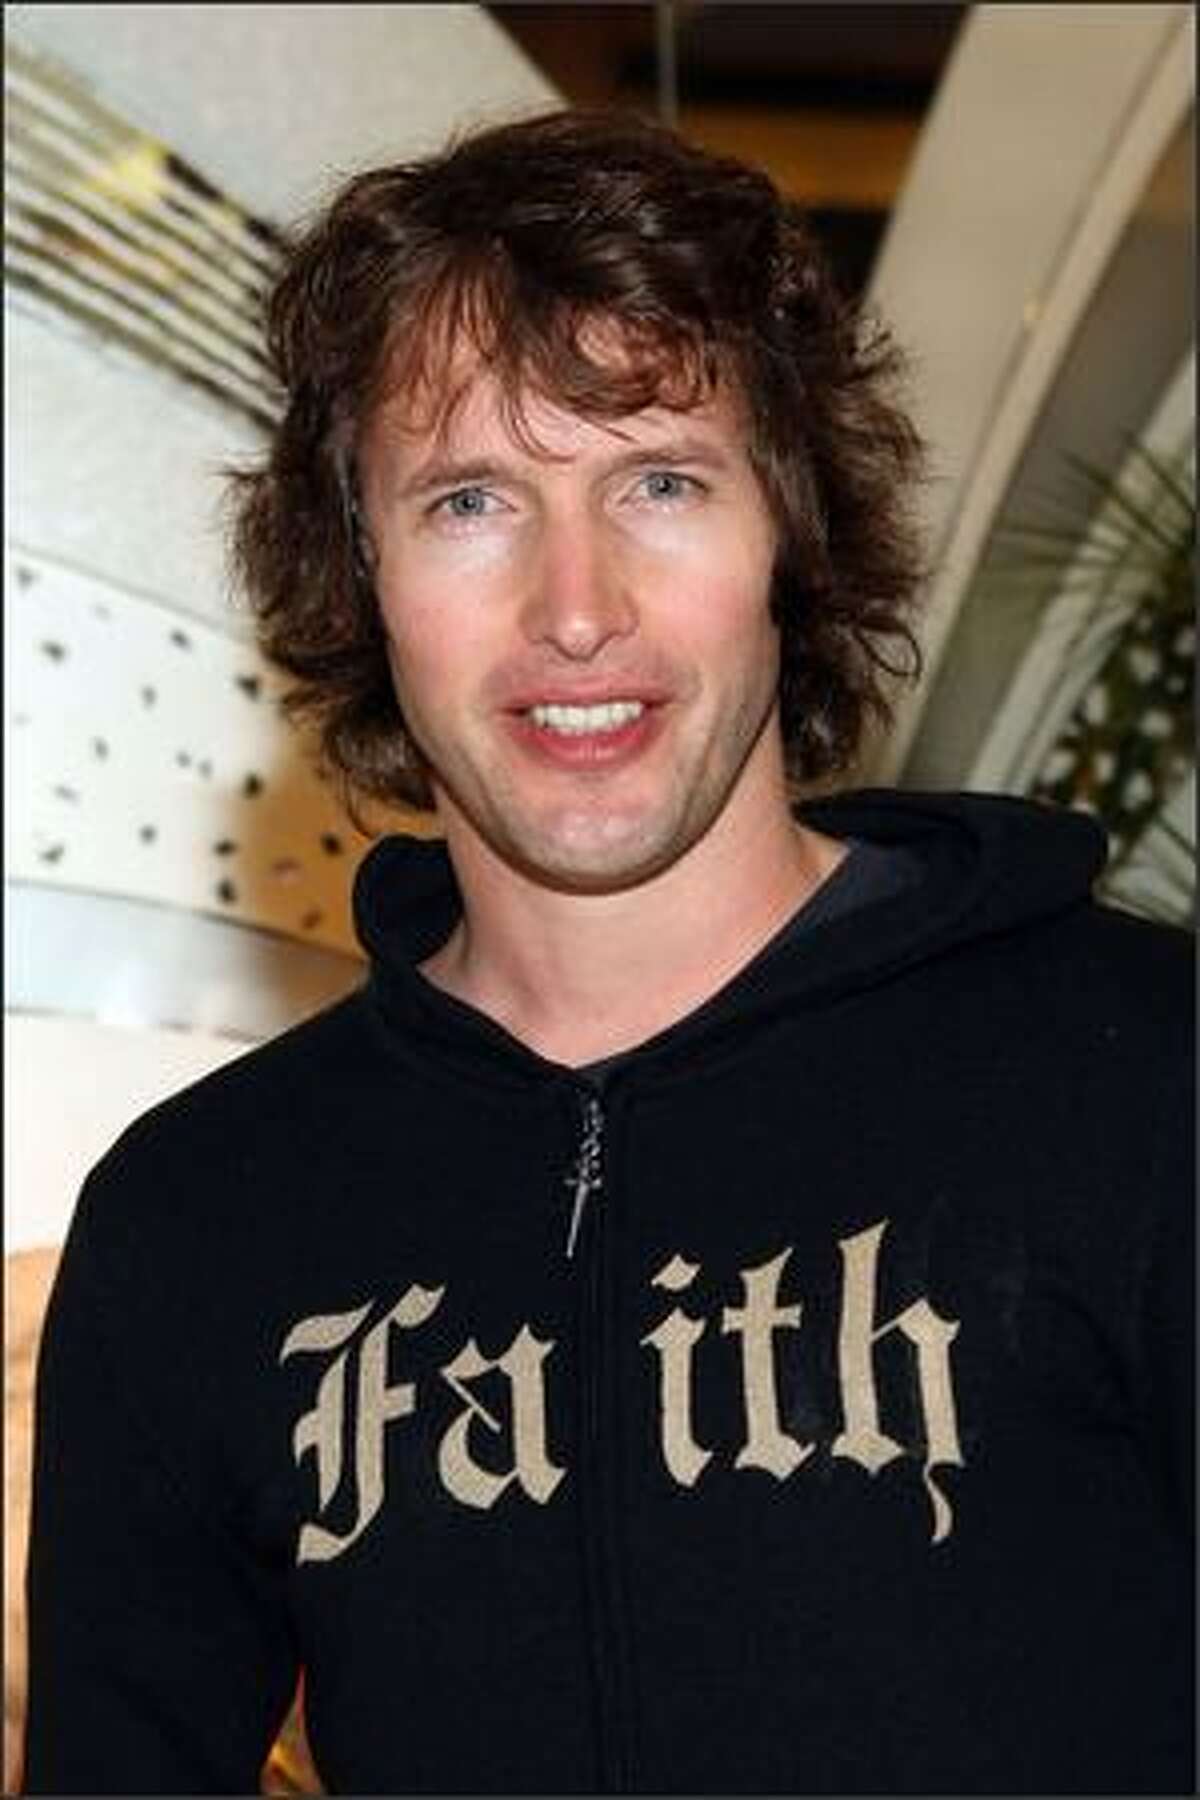 Singer James Blunt arrives for a special performance for the Miracle Africa International Foundation Charity sponsored by Chopard at the VIP Room in Cannes, France.